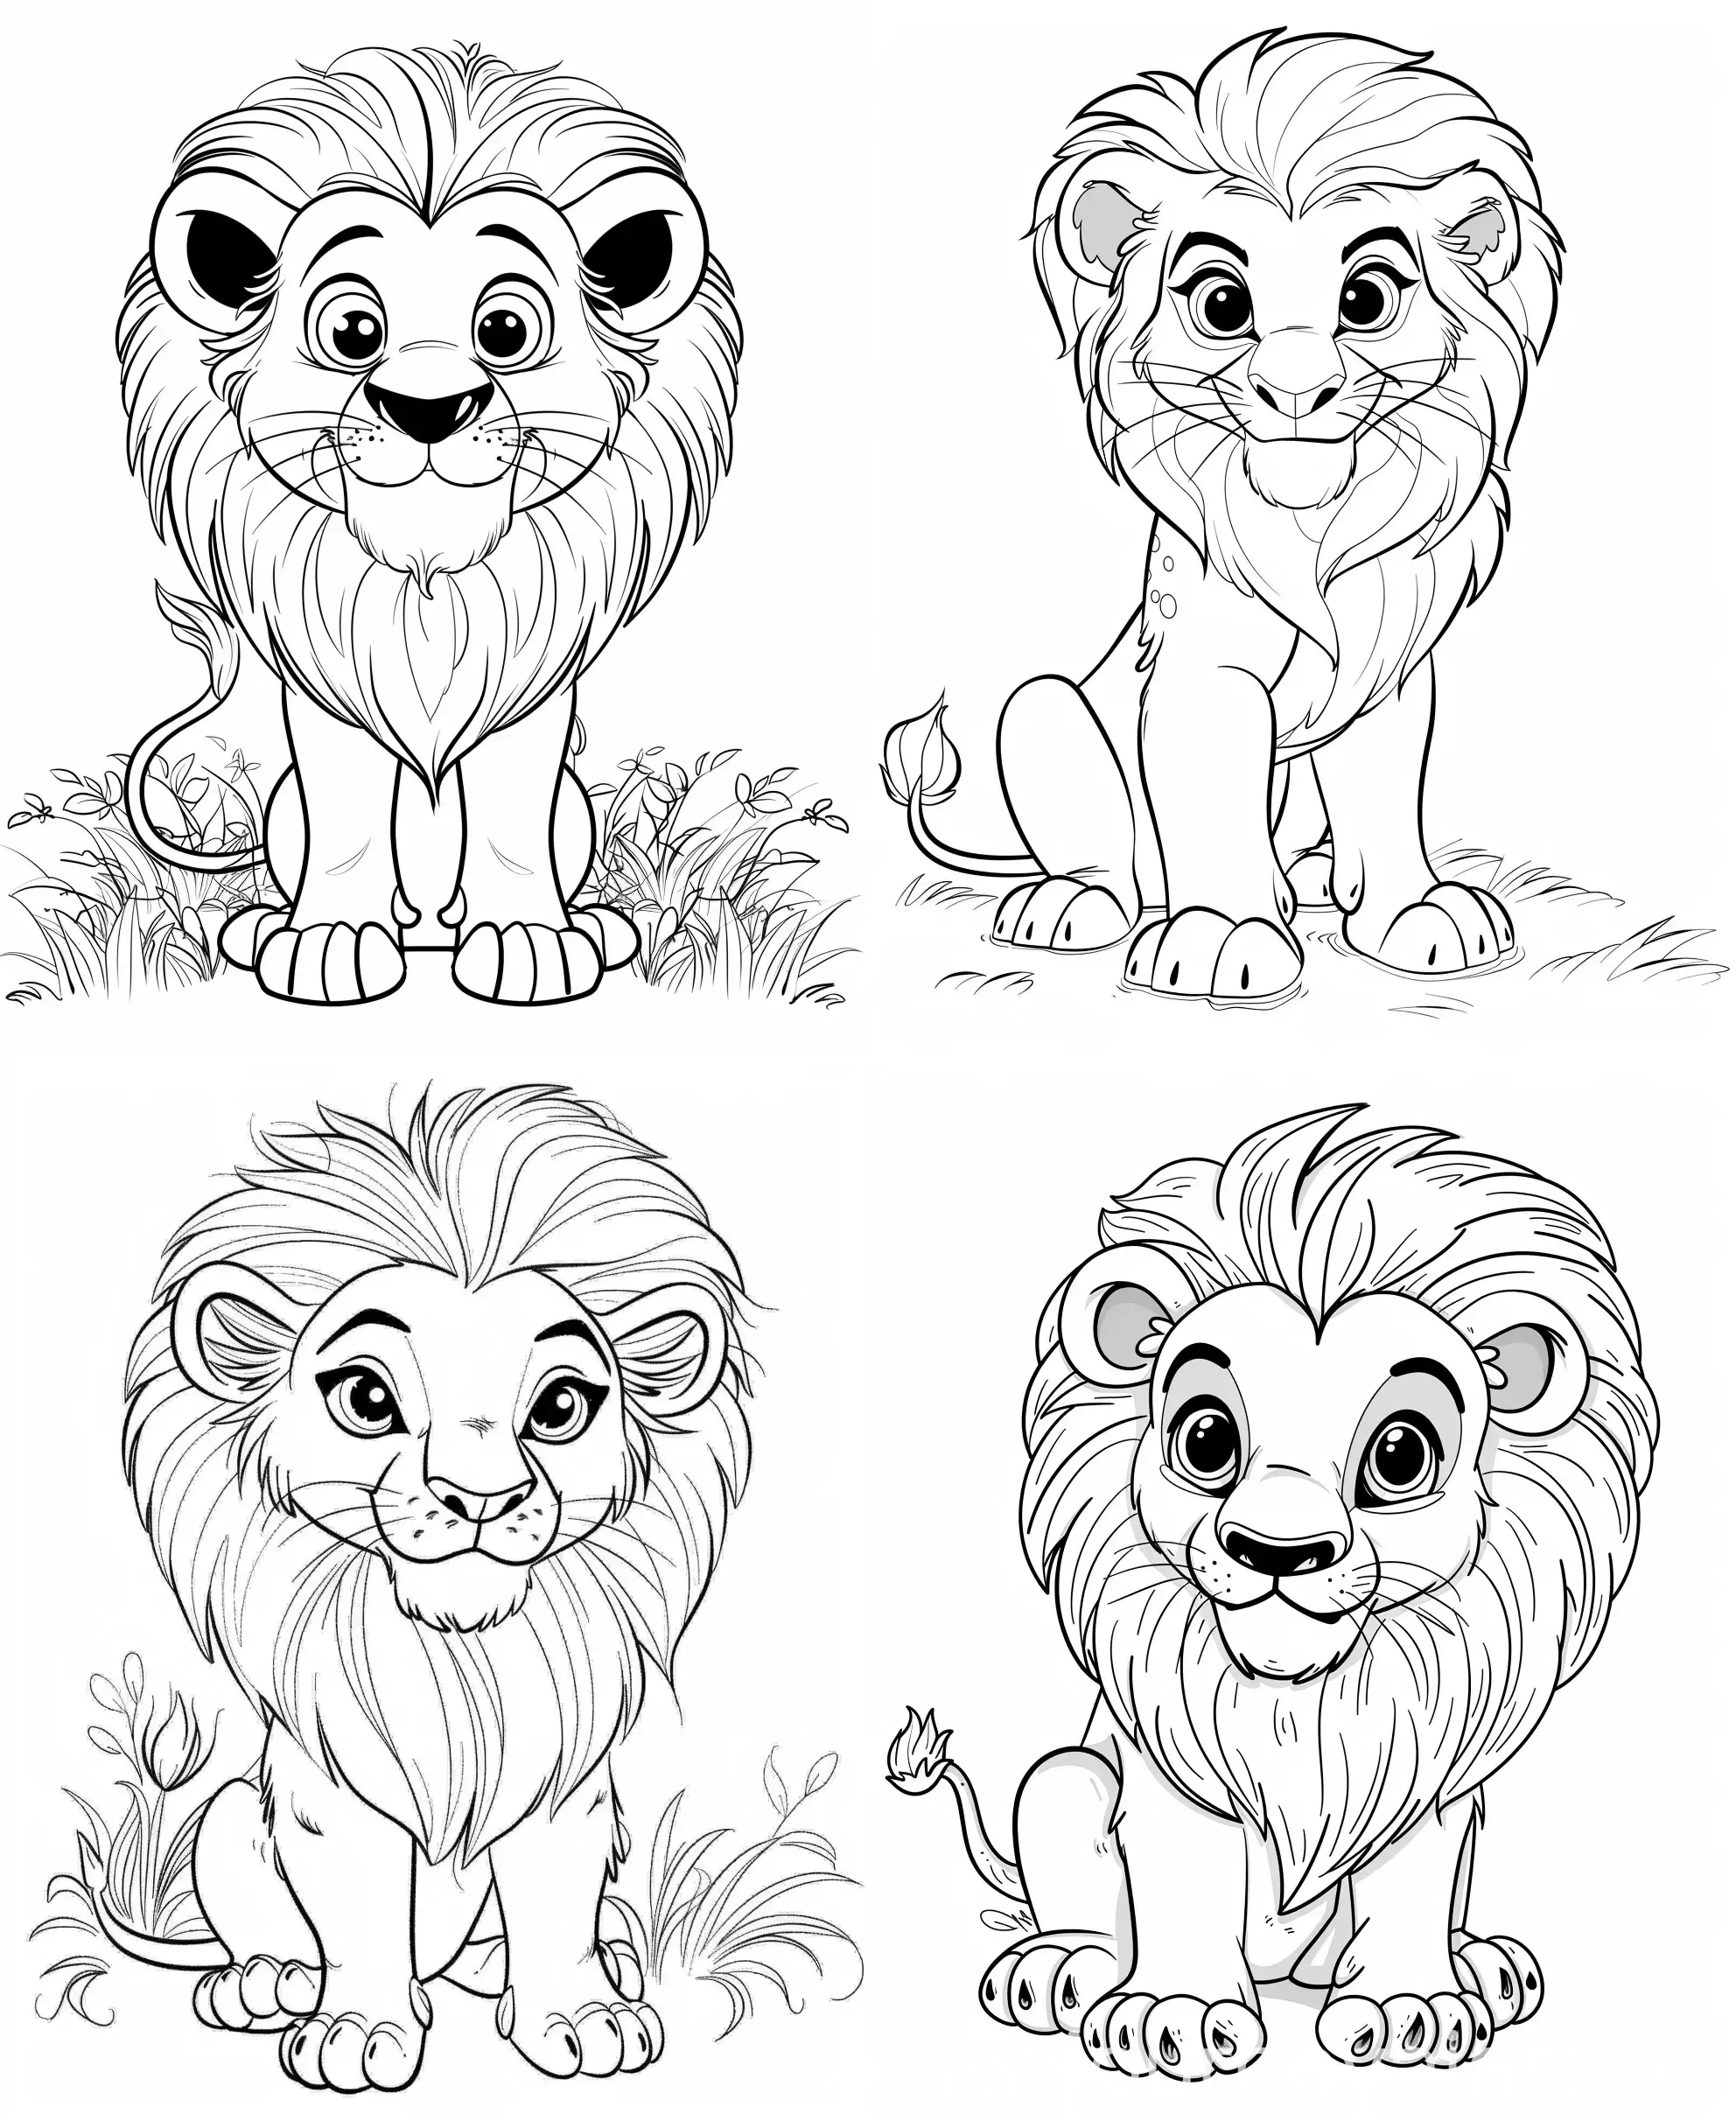 Coloring page of a cute Lion, use clean lines and leave plenty of white space for coloring, simple line art, one line art, clean and minimalistic line, --ar 9:11 